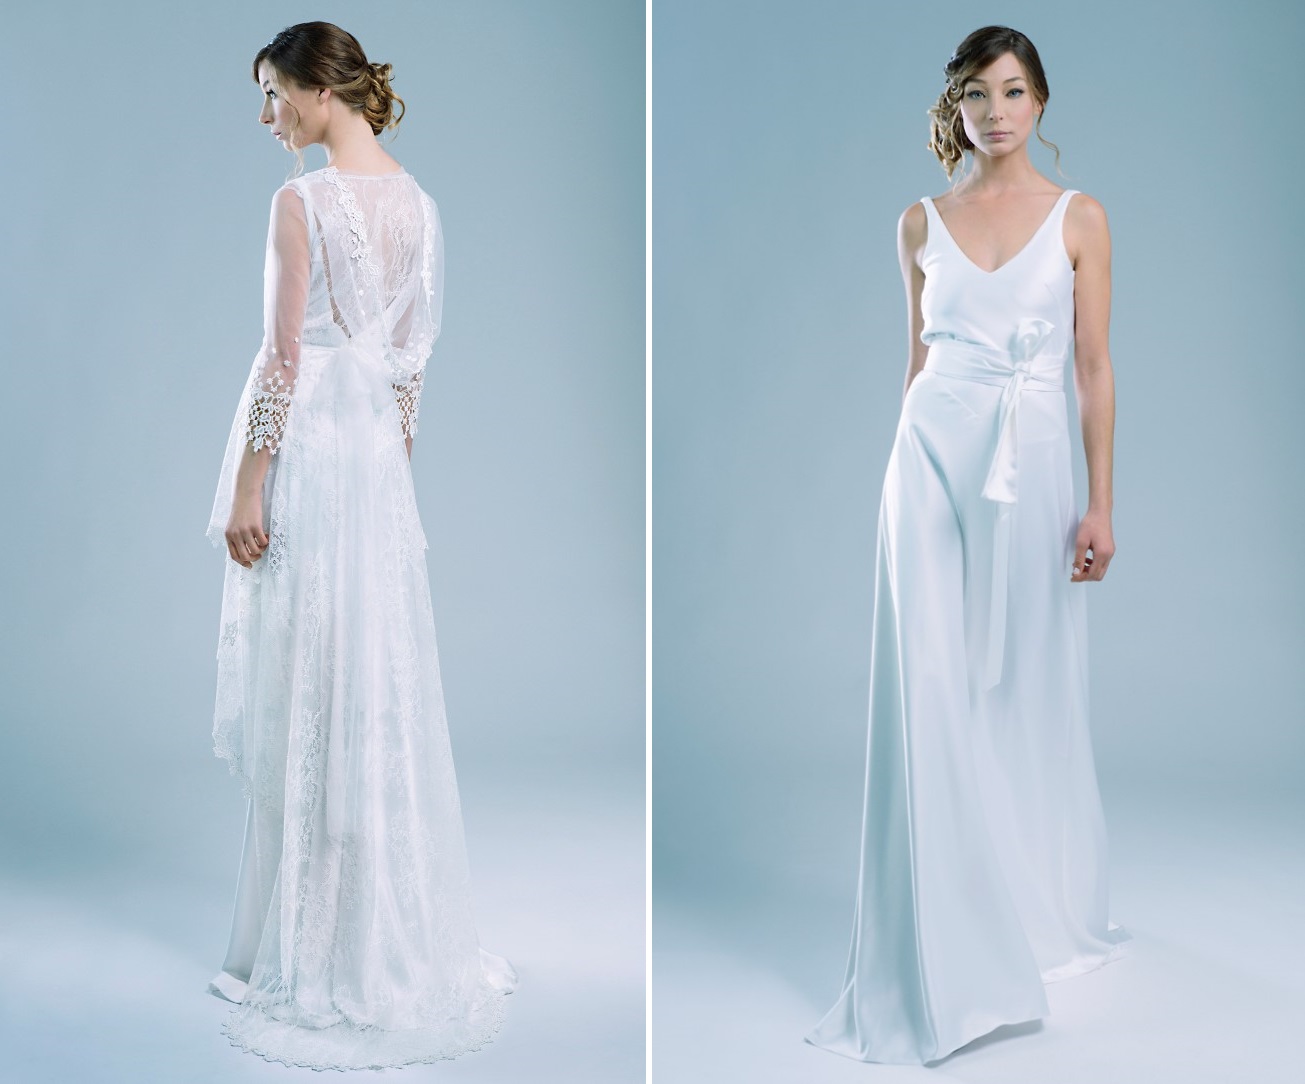 The Music Room - The Beautiful 2016 Bridal Collection from Petite Lumiere - Cadenza 2 in 1 Wedding Dress